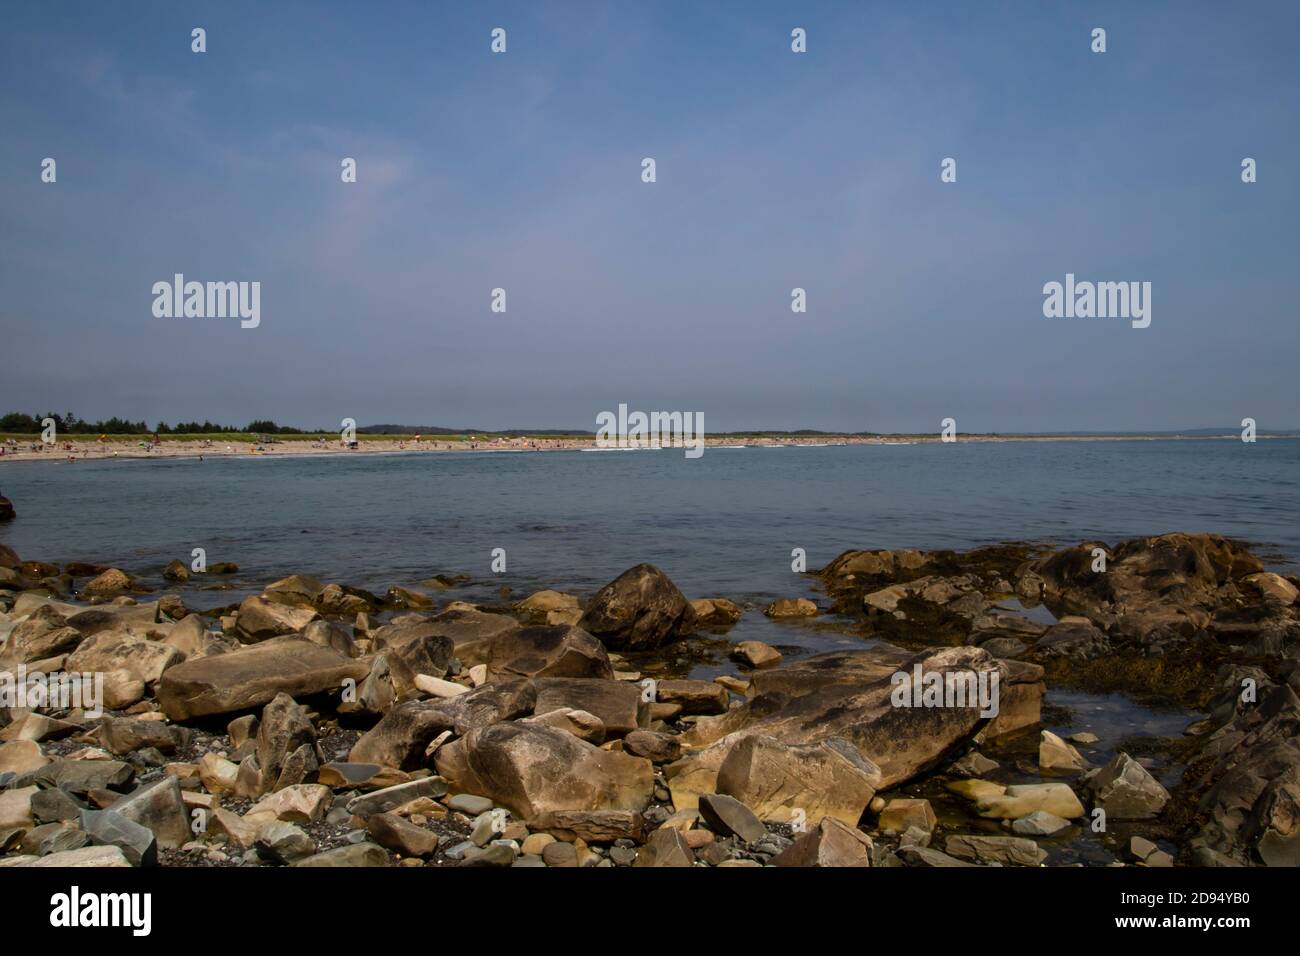 A view of a people filled beach as seen from across a bay with a rocky shoreline in the foreground.  The blue sky has an number of wispy clouds in it. Stock Photo